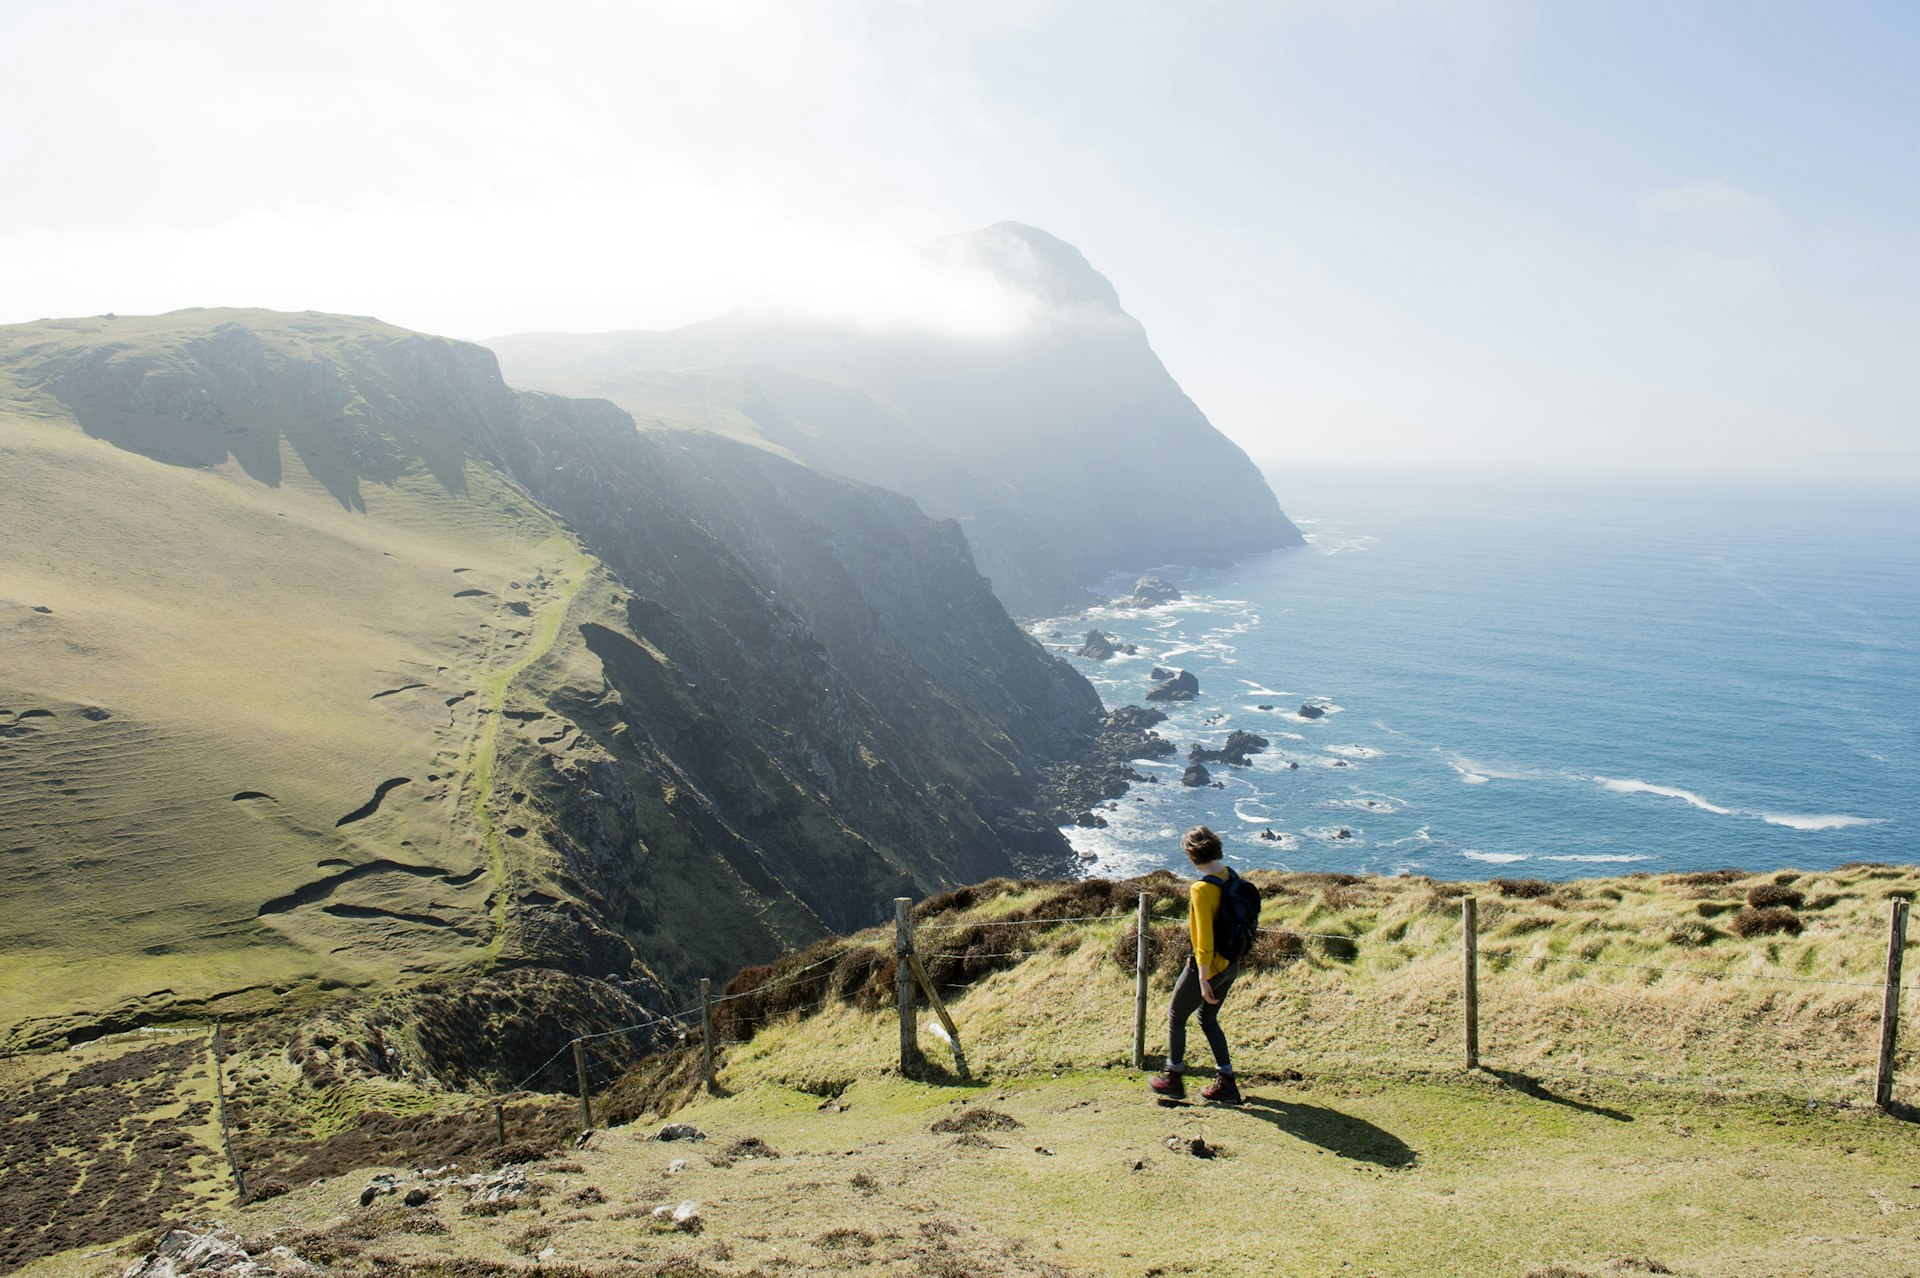 A hiker standing on a grassy cliff overlooking the ocean, with a mountain partially enveloped in mist in the background, under a clear blue sky.